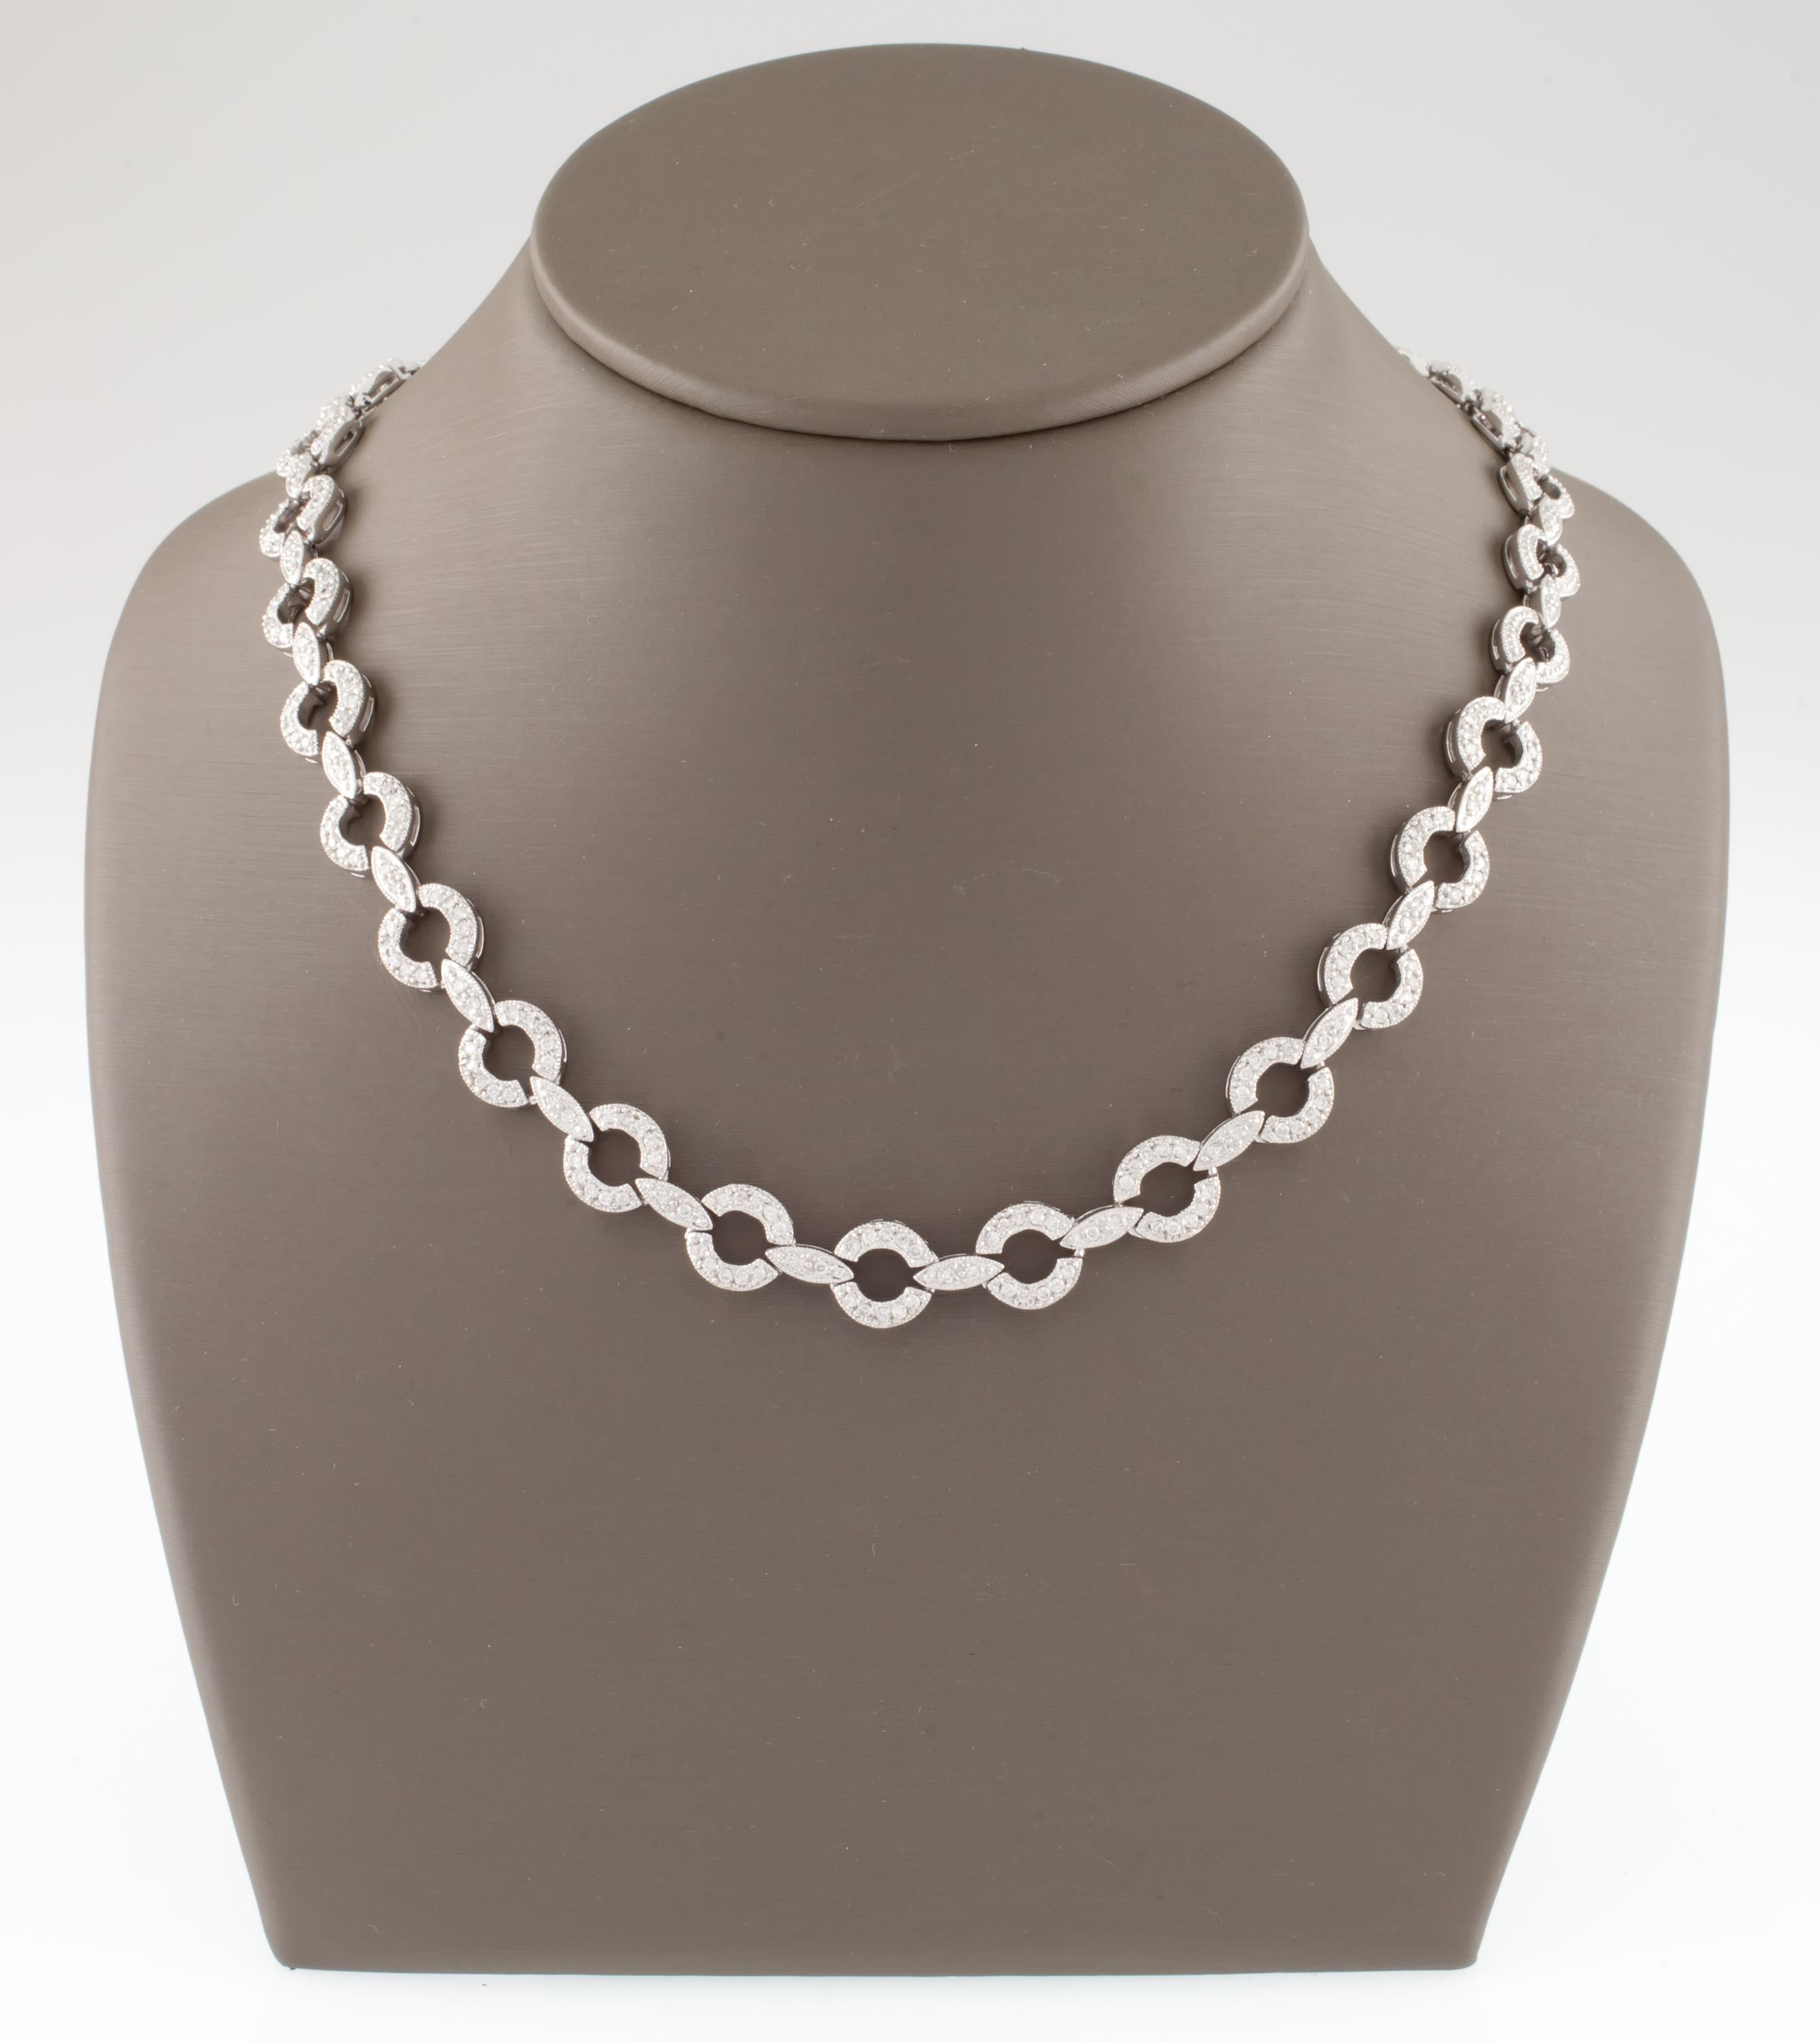 Gorgeous 14k White Gold Link Necklace
Each Necklace is a Loop set with Pave-Set Round Diamond
Loops Closer to Clasp smaller than loops in middle
Smaller Loops = Appx 7 mm in Diameter
Larger Loops = Appx 8.5 mm in Diameter
Total Length of Necklace =